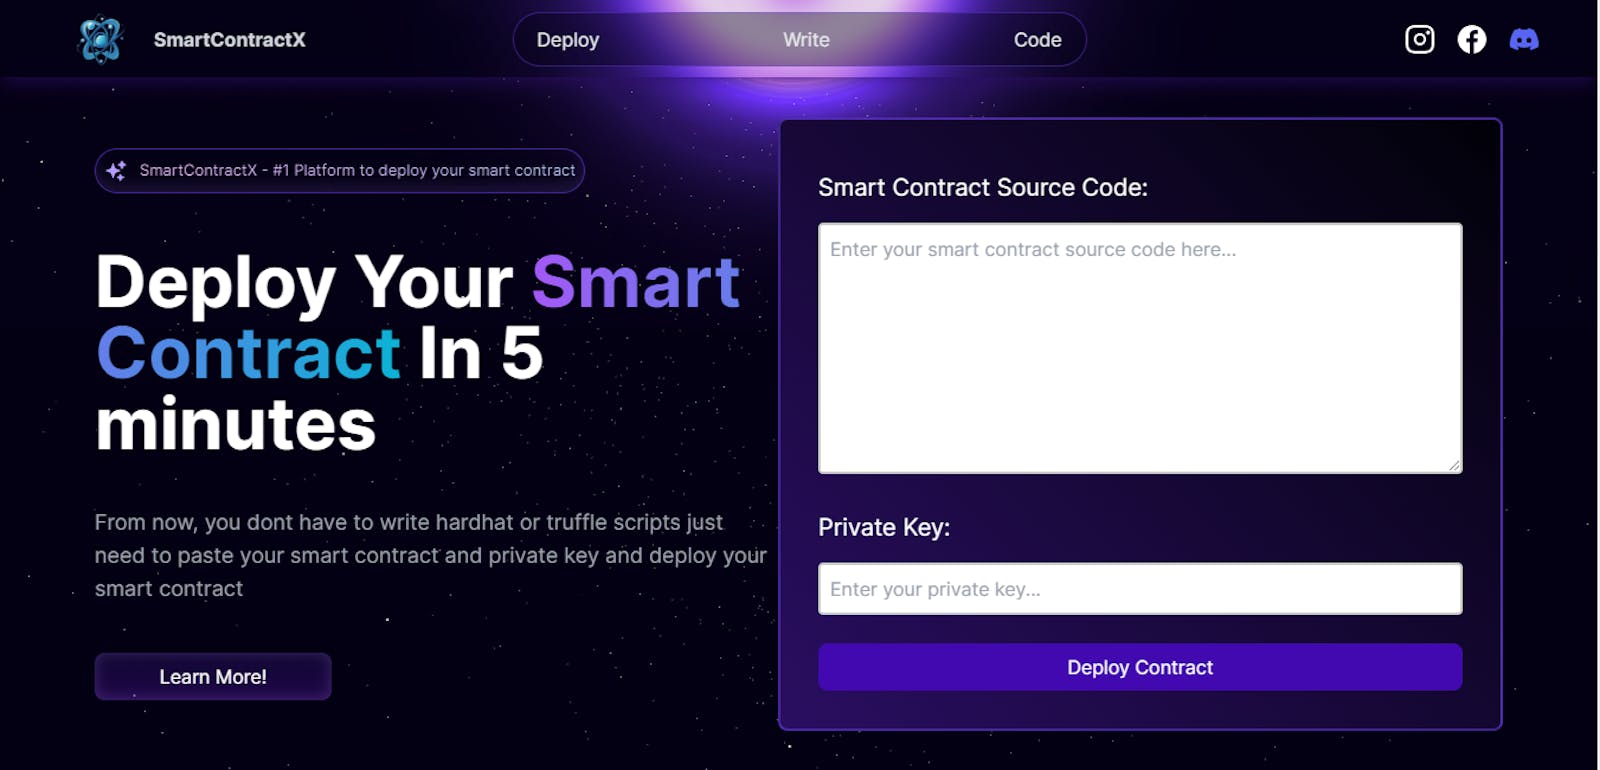 Made a Dapp to Generate, Deploy and Test Smart Contract 🔥